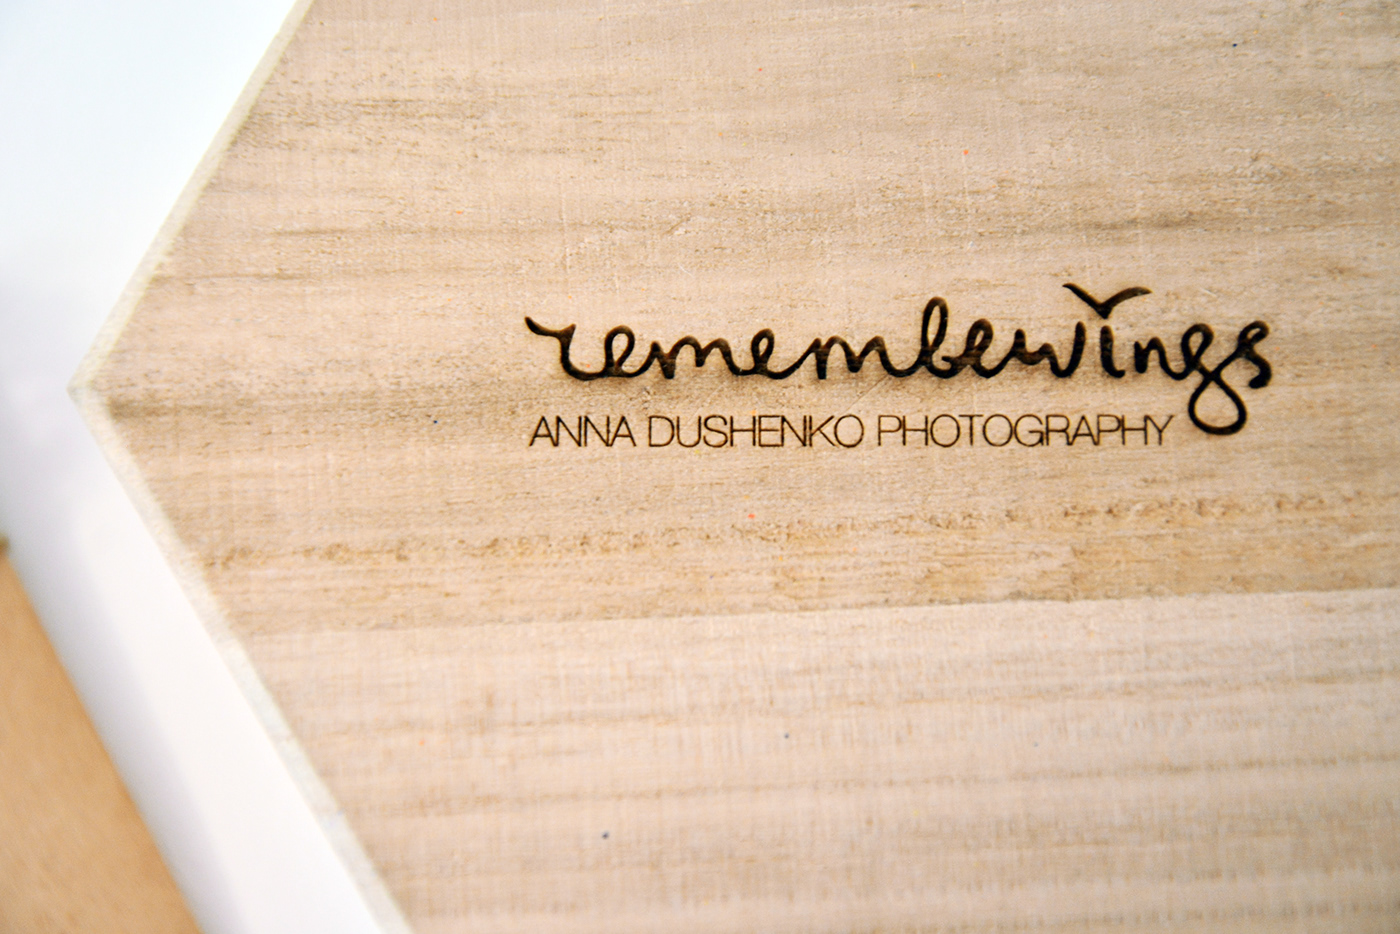 handmade Packaging Wooden box postcards engraving handcrafted engraved wedding packaging Presents package for photos